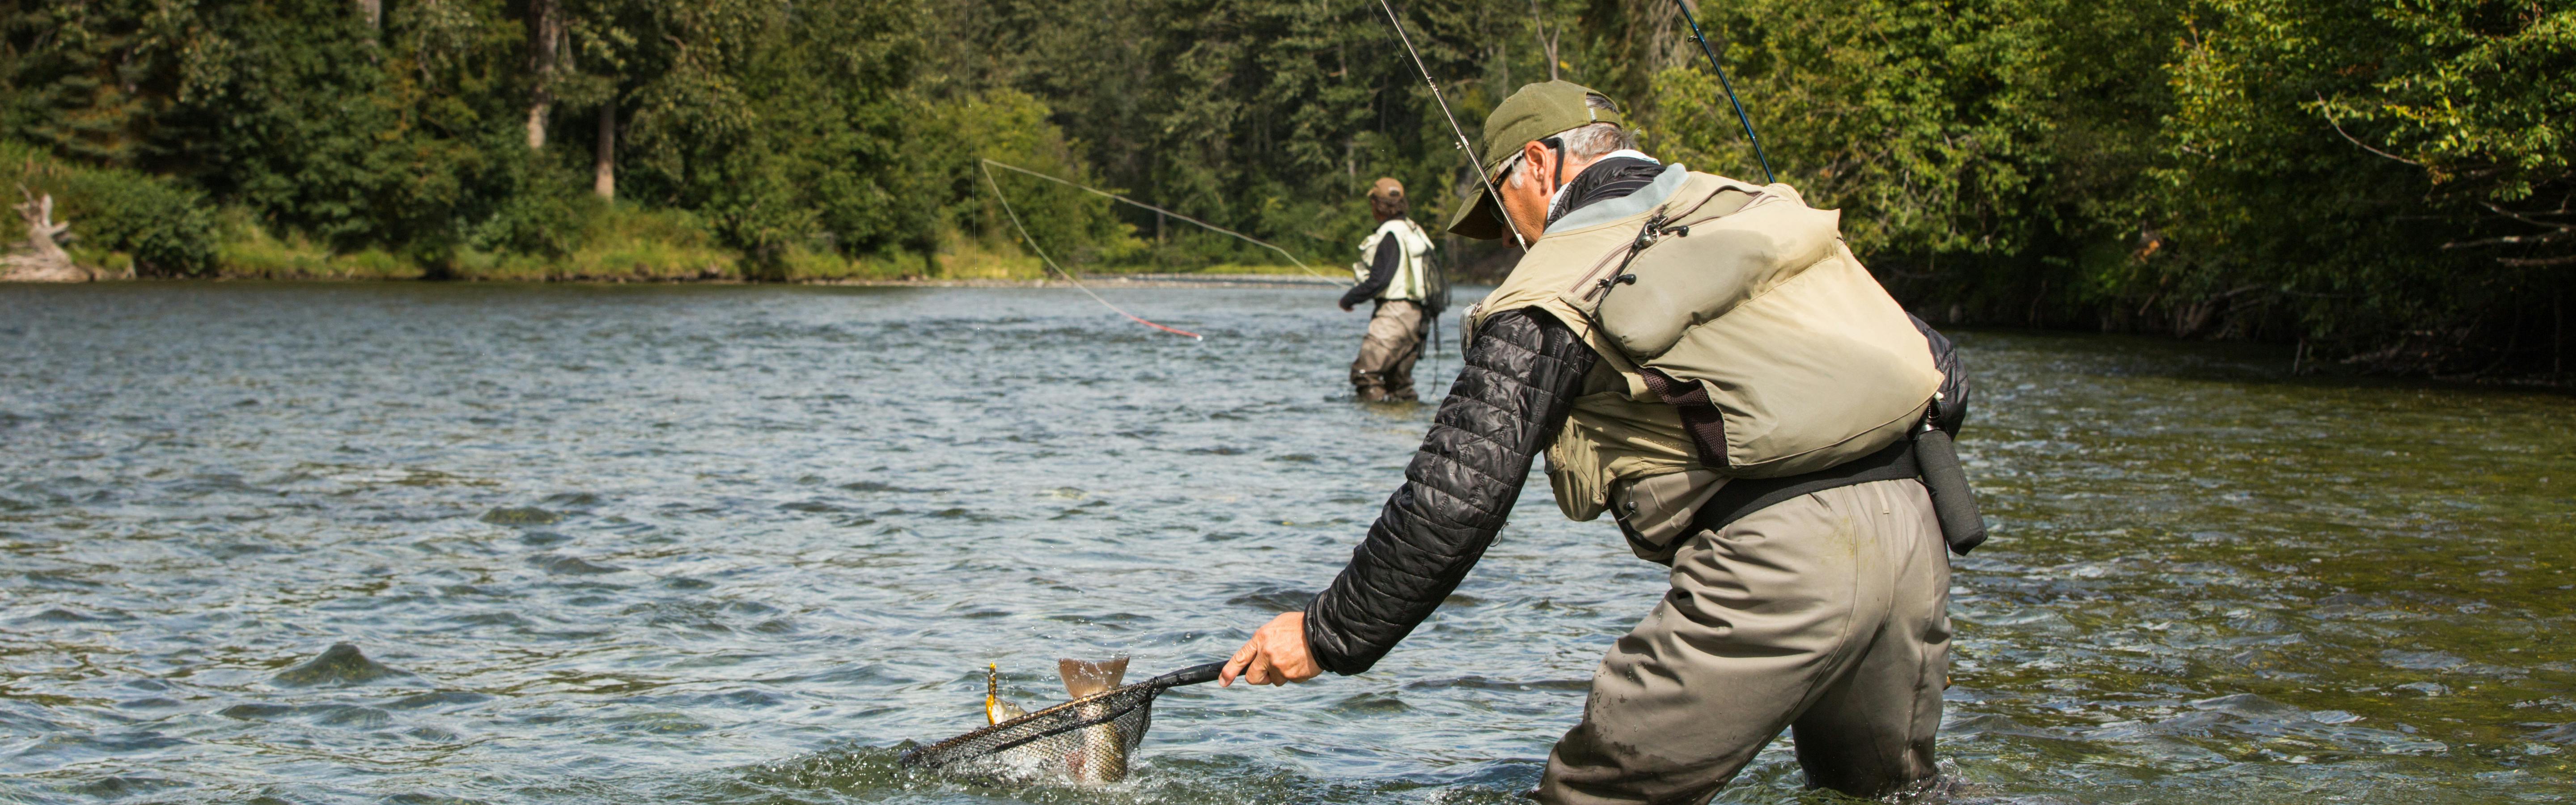 The 11 Best Wader and Fishing Apparel Brands